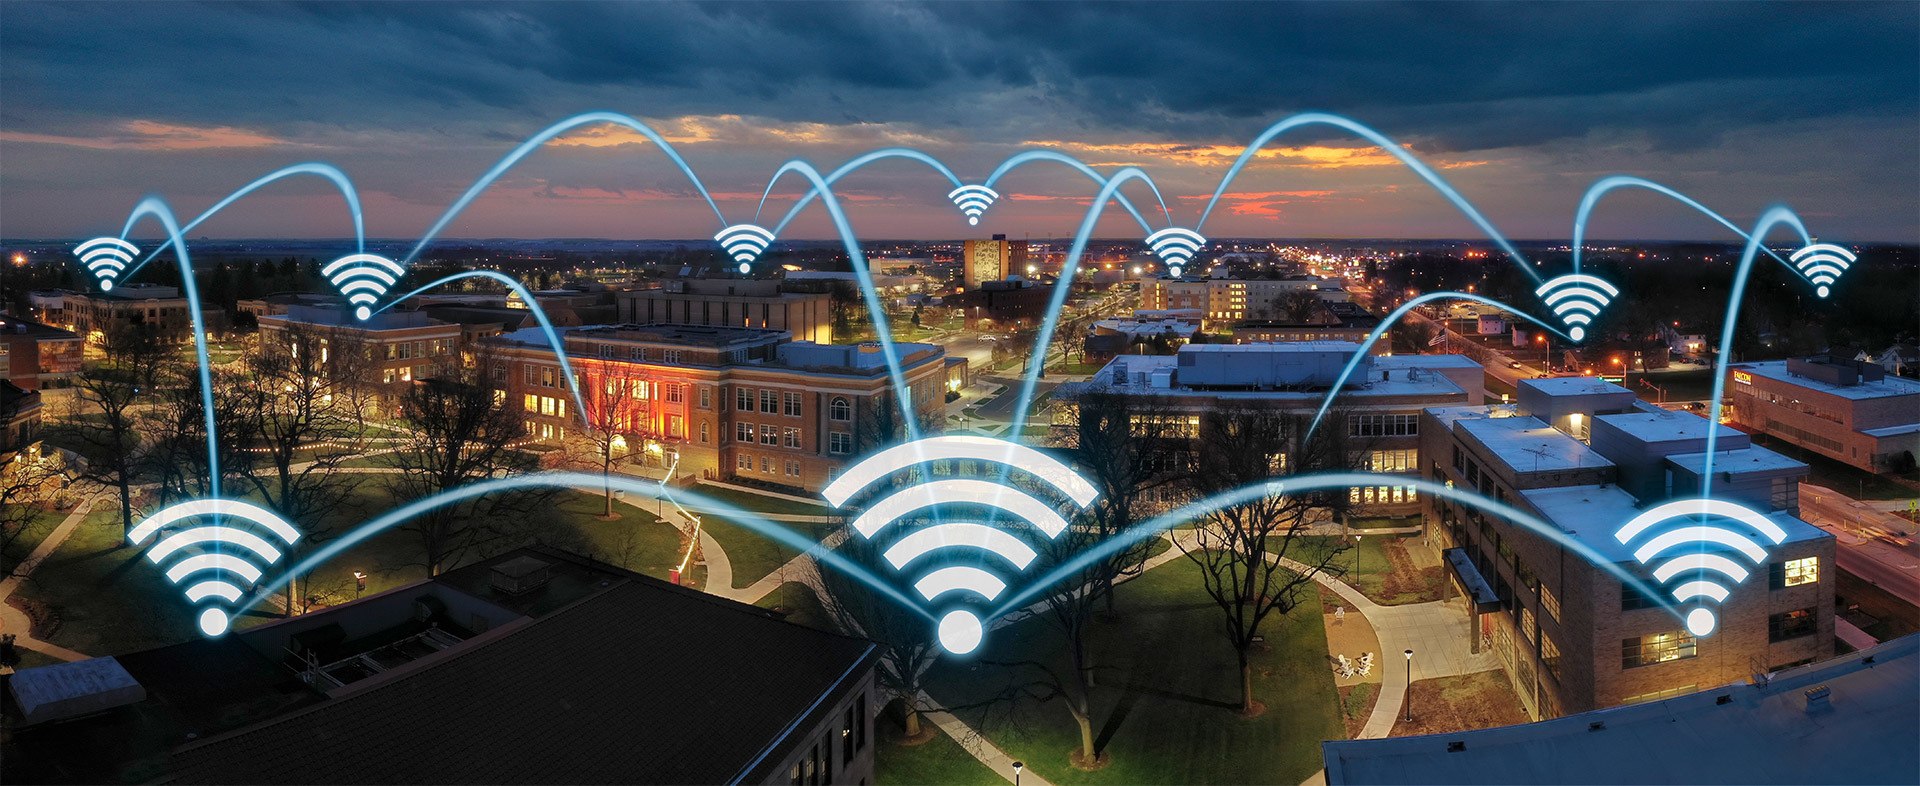 Wifi Signals Across Picture of Campus